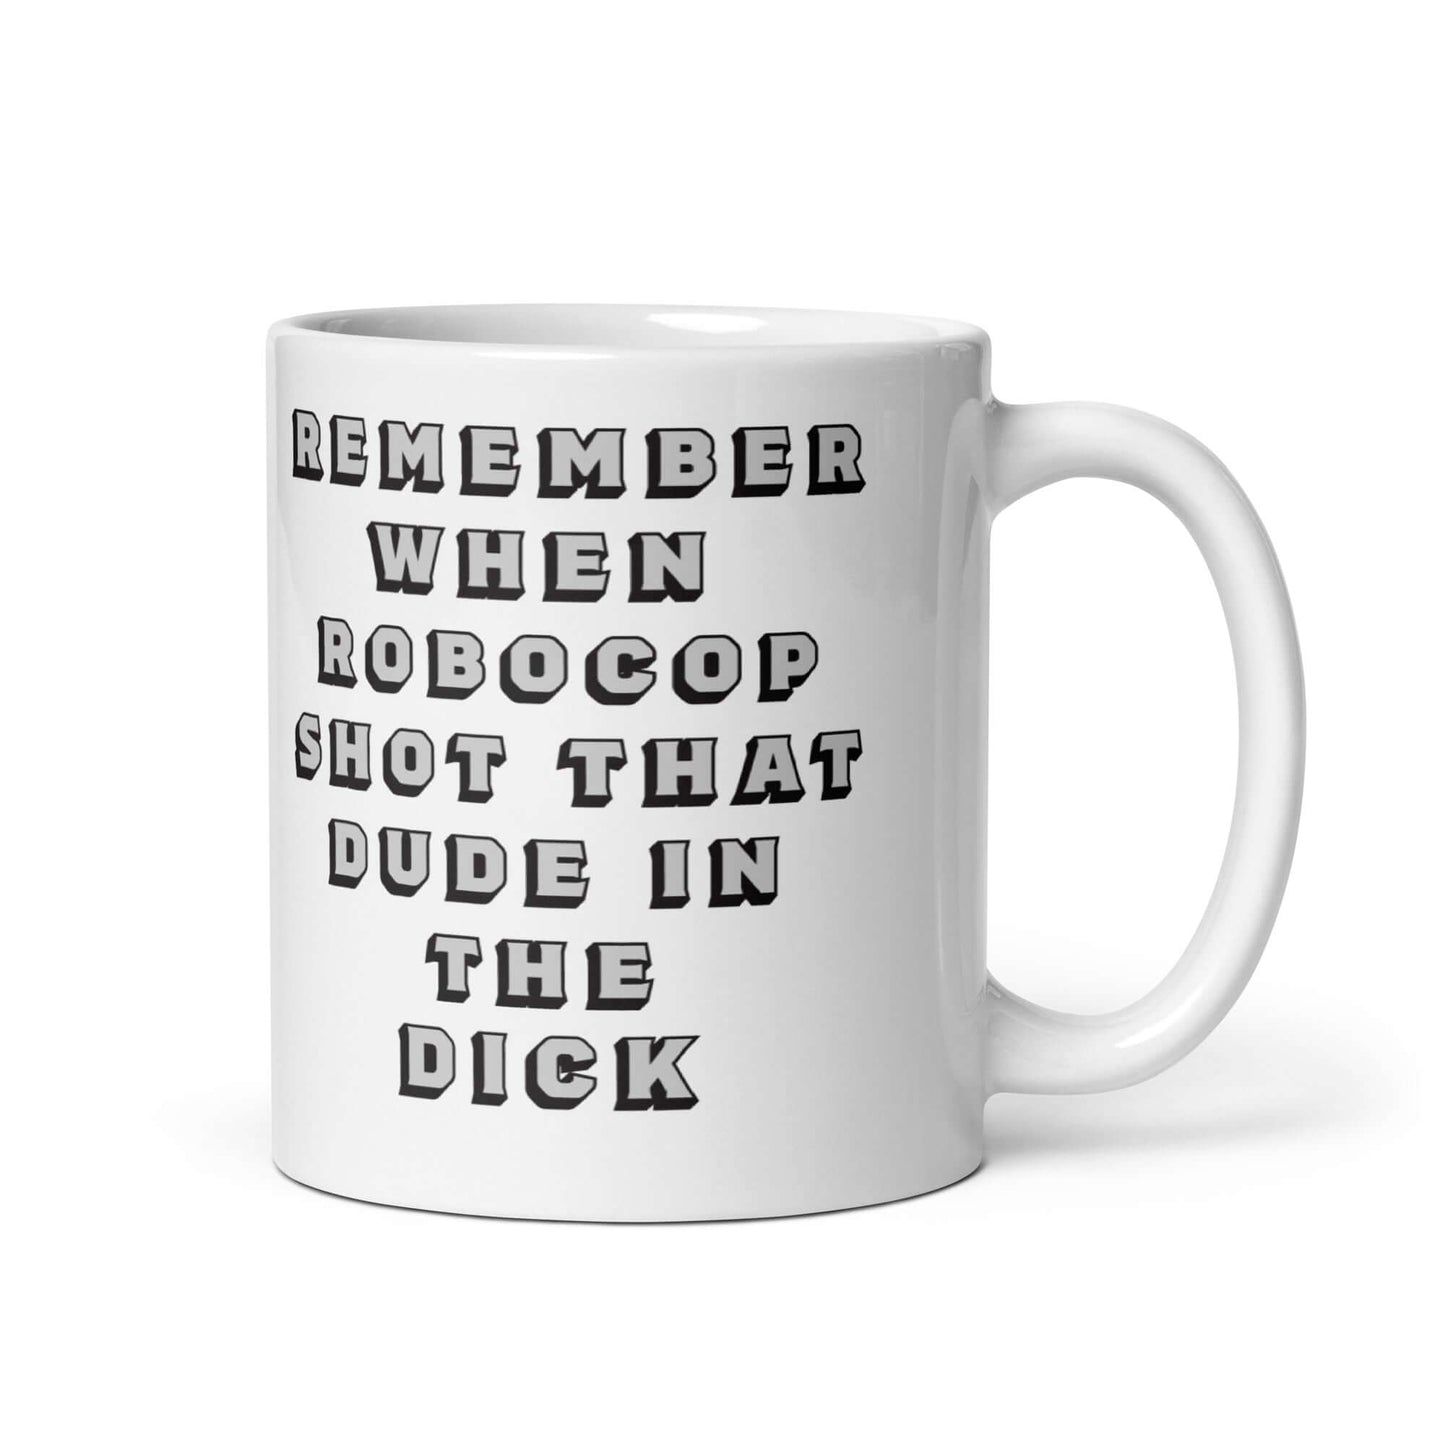 Remember when Robocop shot that dude in the dick? - White glossy mug - Horrible Designs